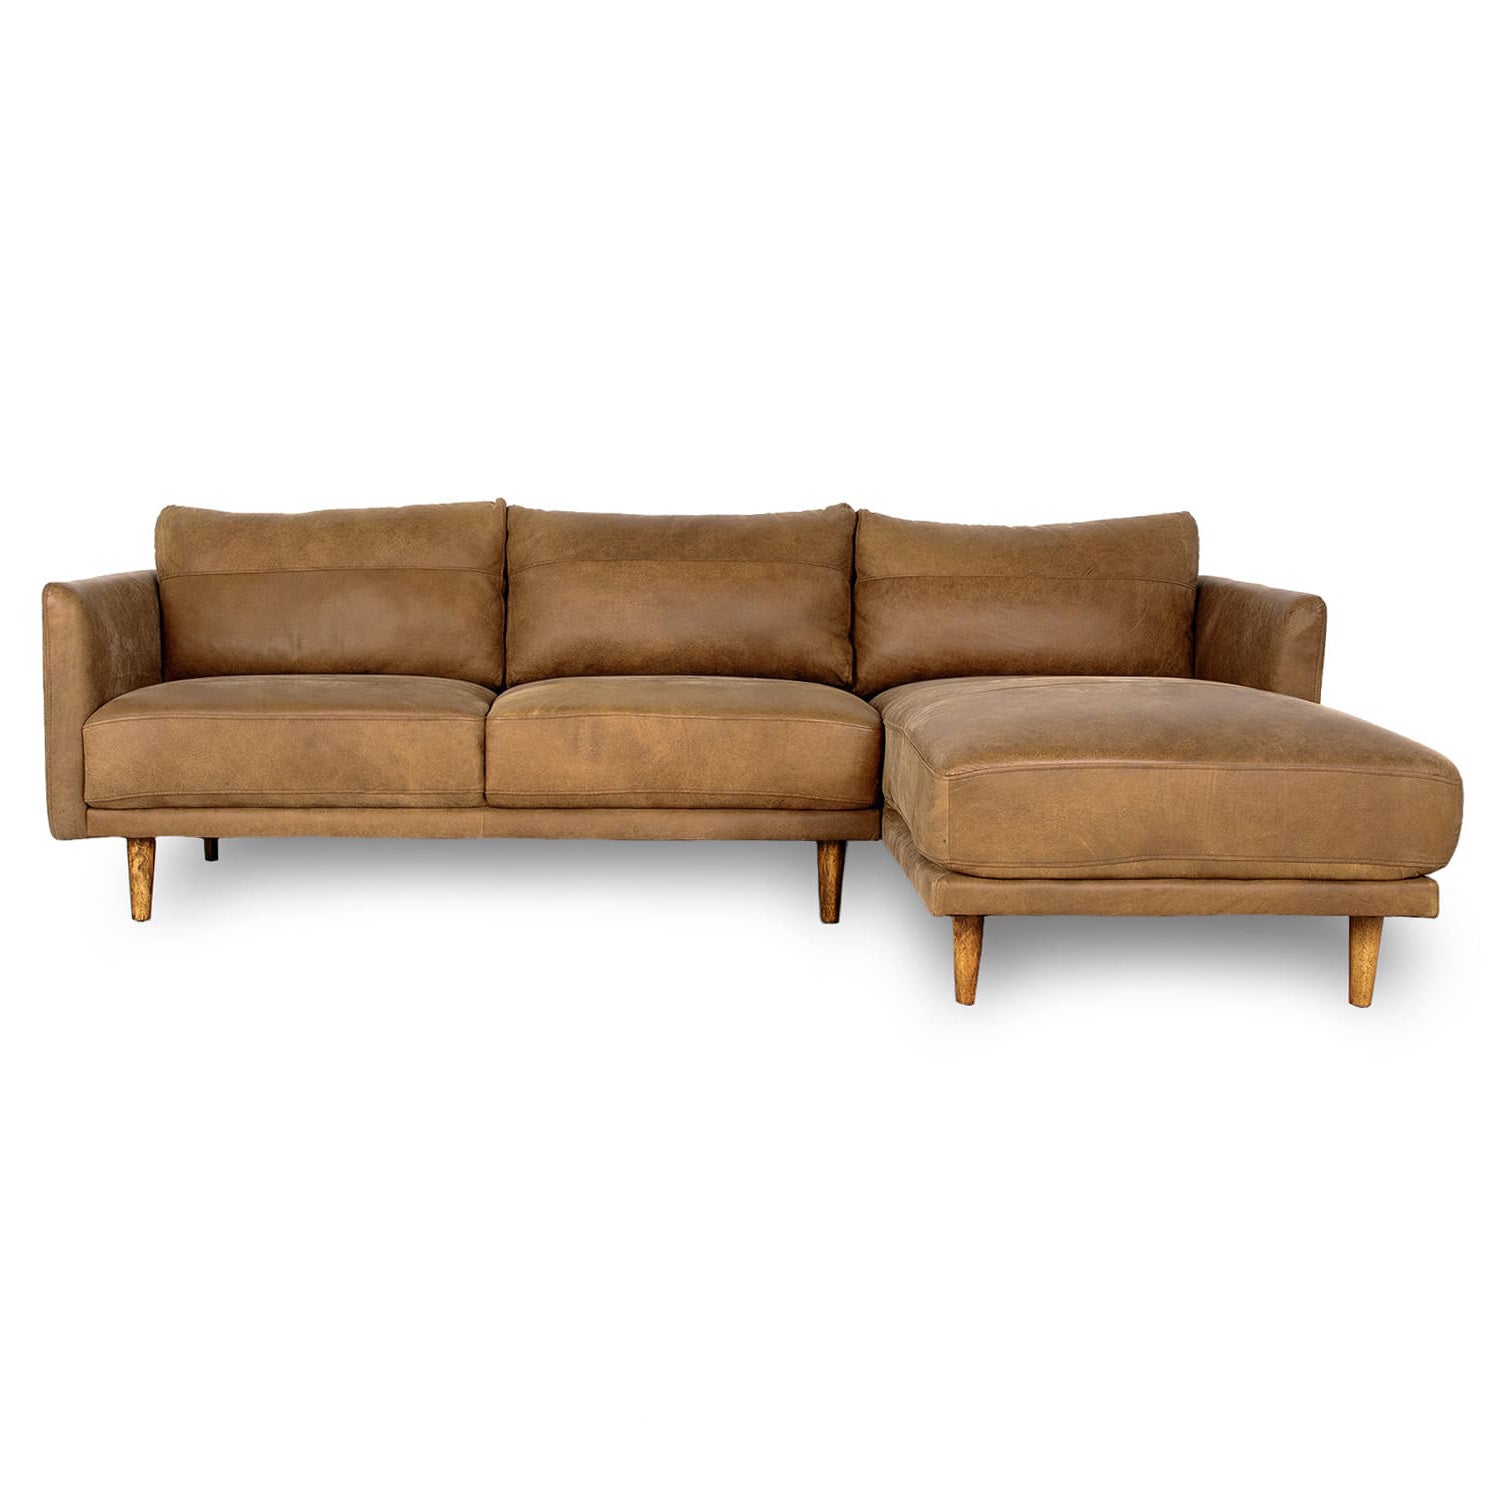 Jordie Leather Right Side Facing Chaise Lounge